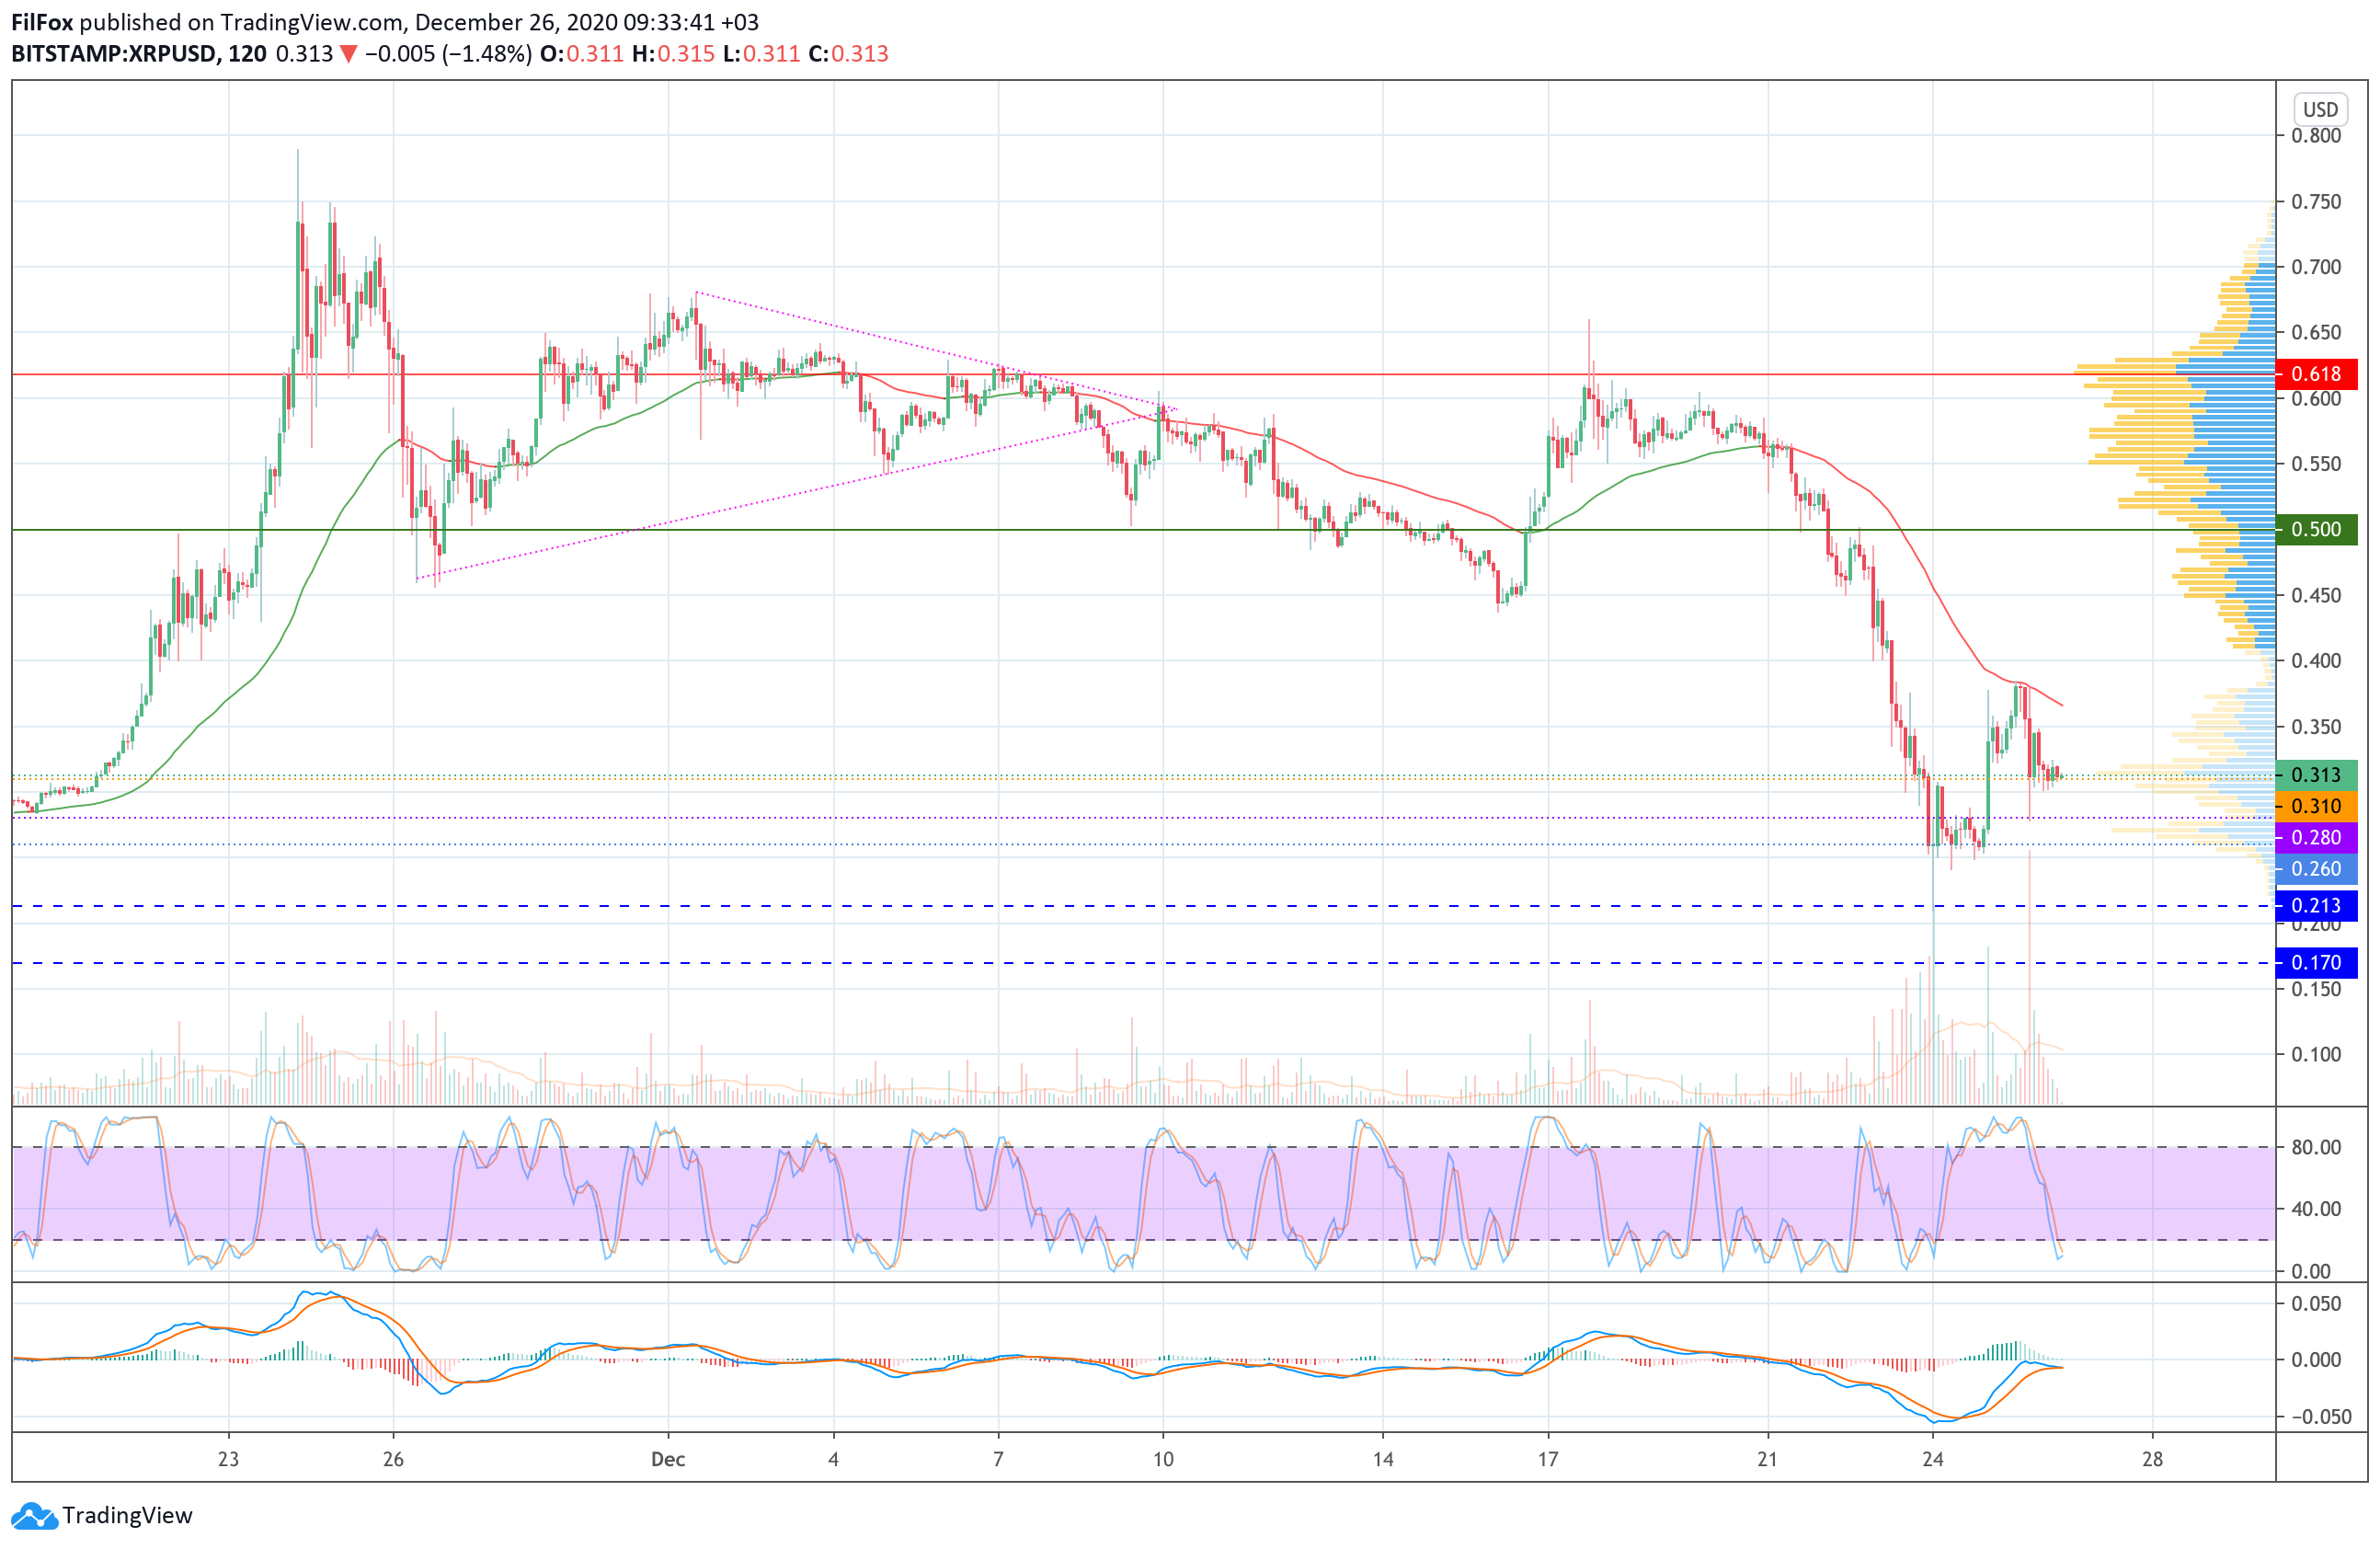 Analysis of prices for Bitcoin, Ethereum, Ripple for 12/26/2020